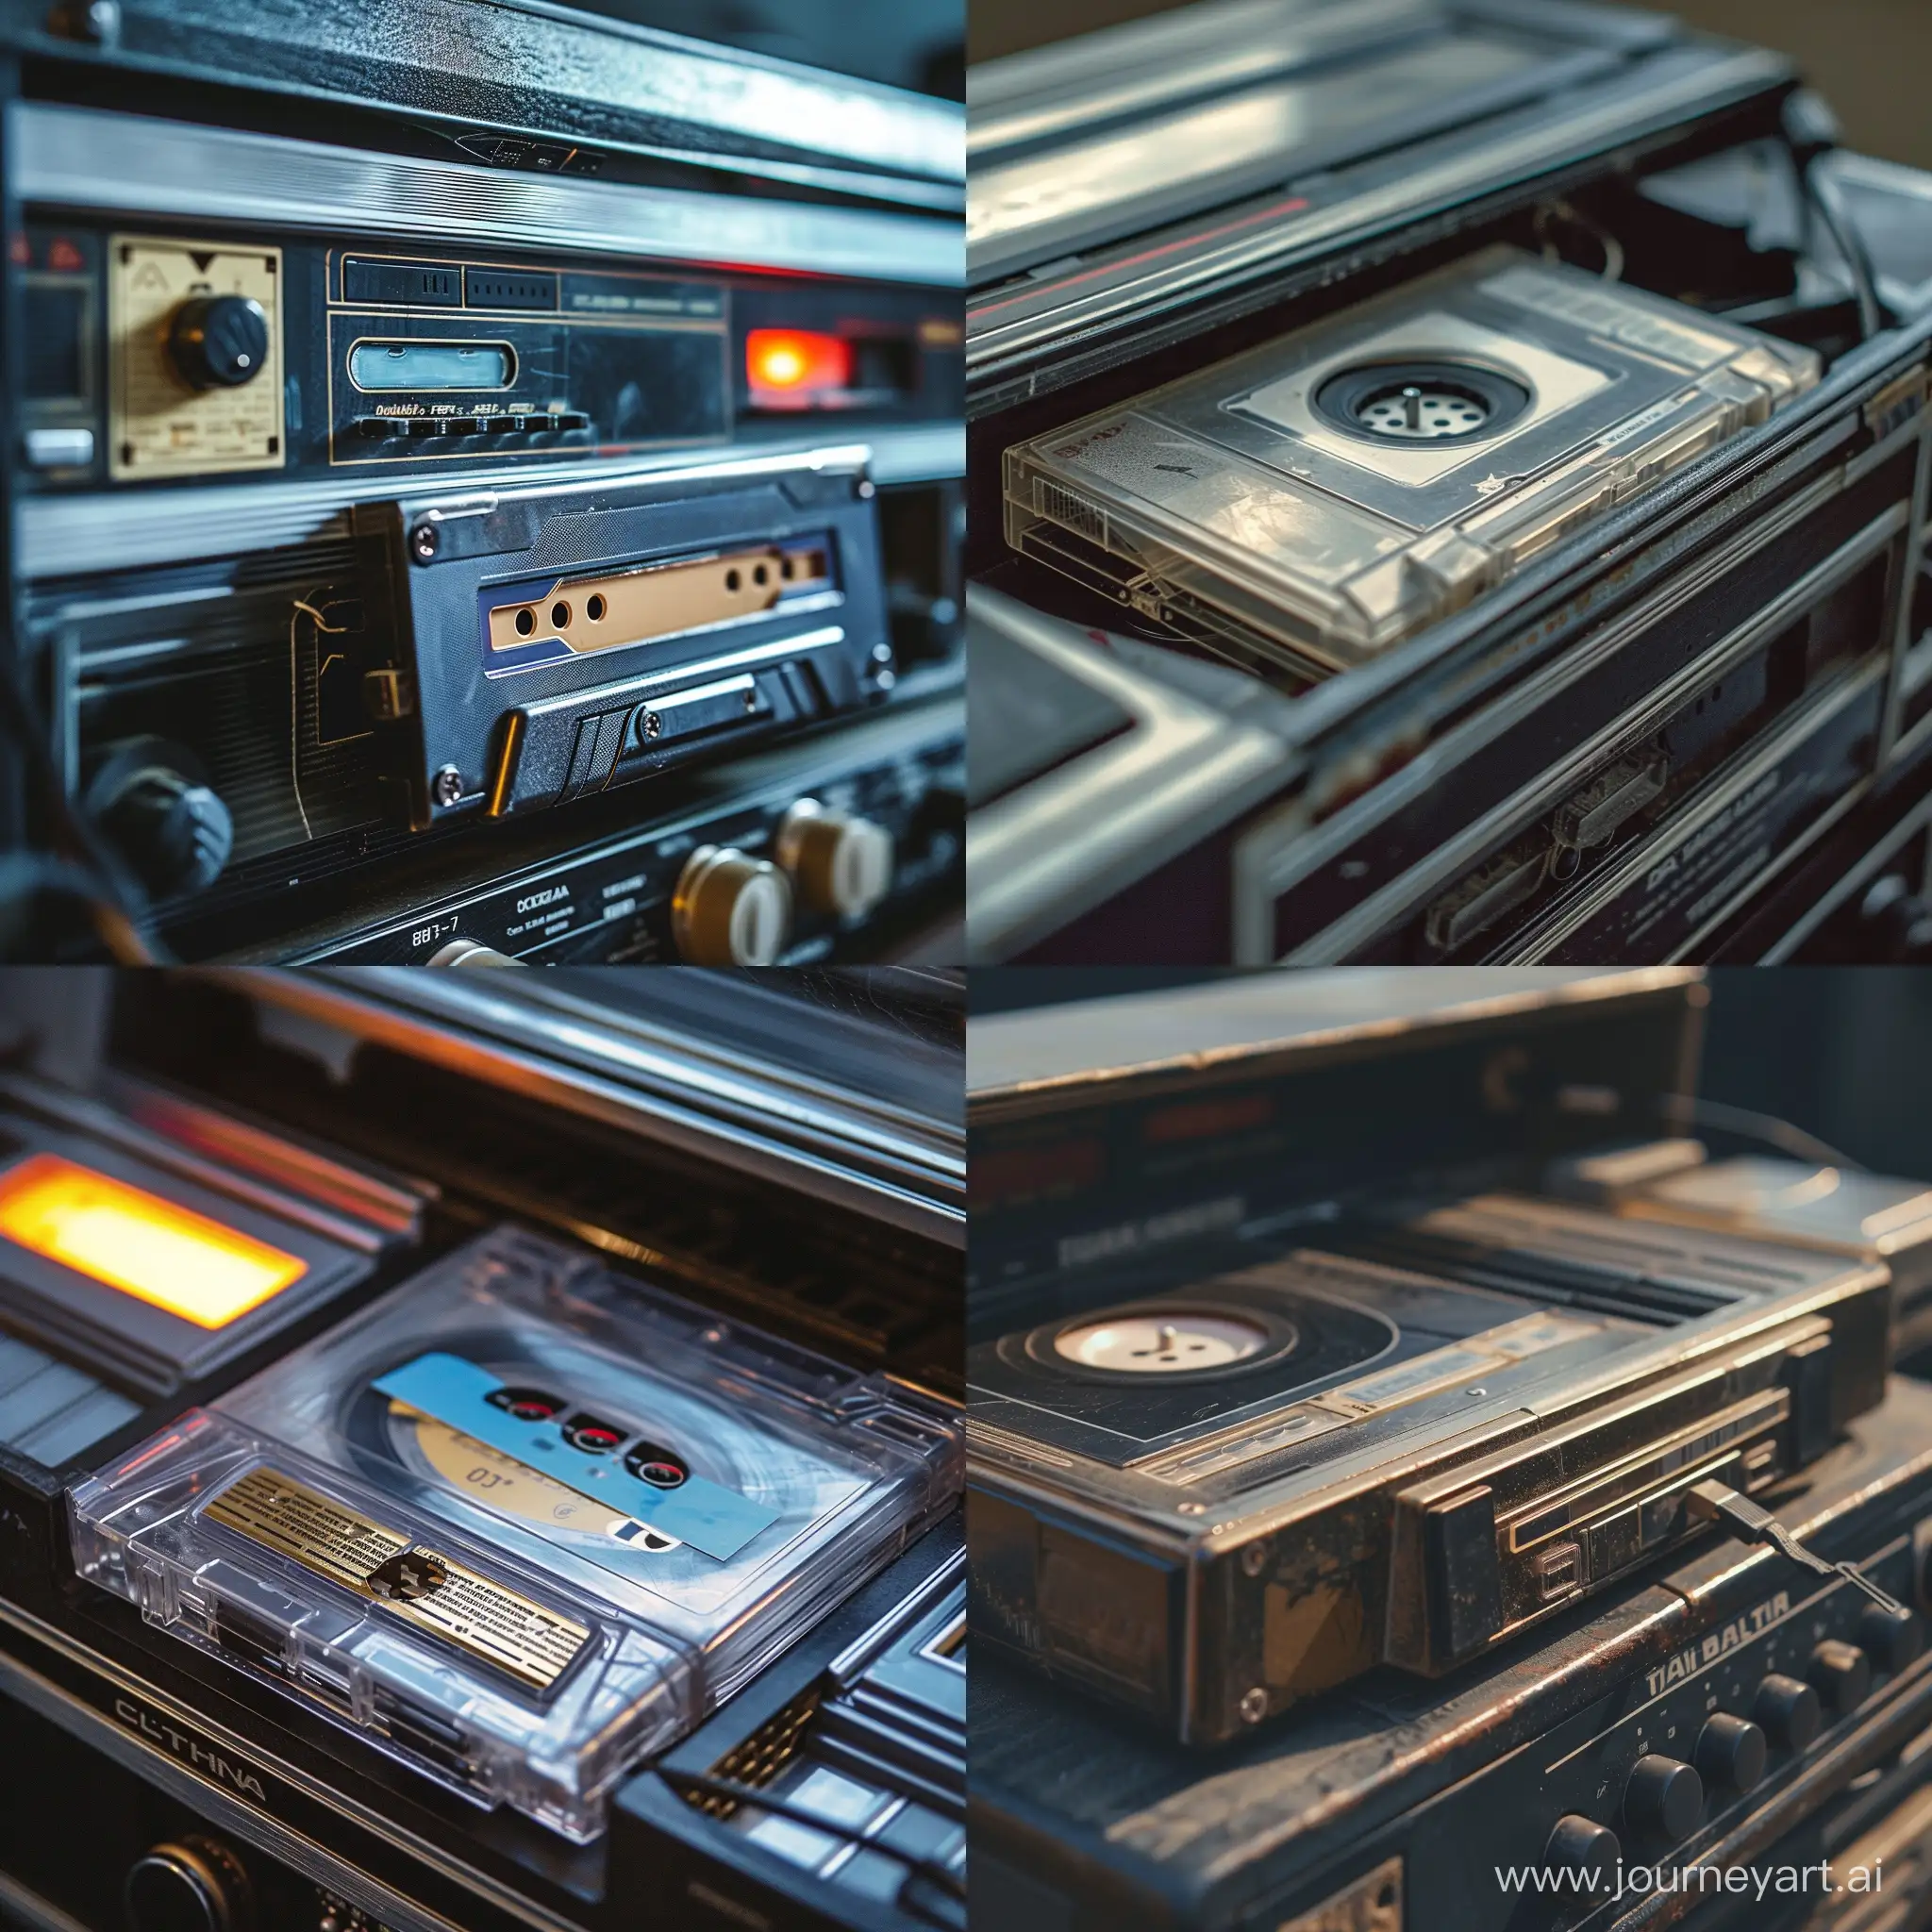 an audio casette in a boombox, closeup, 80s style